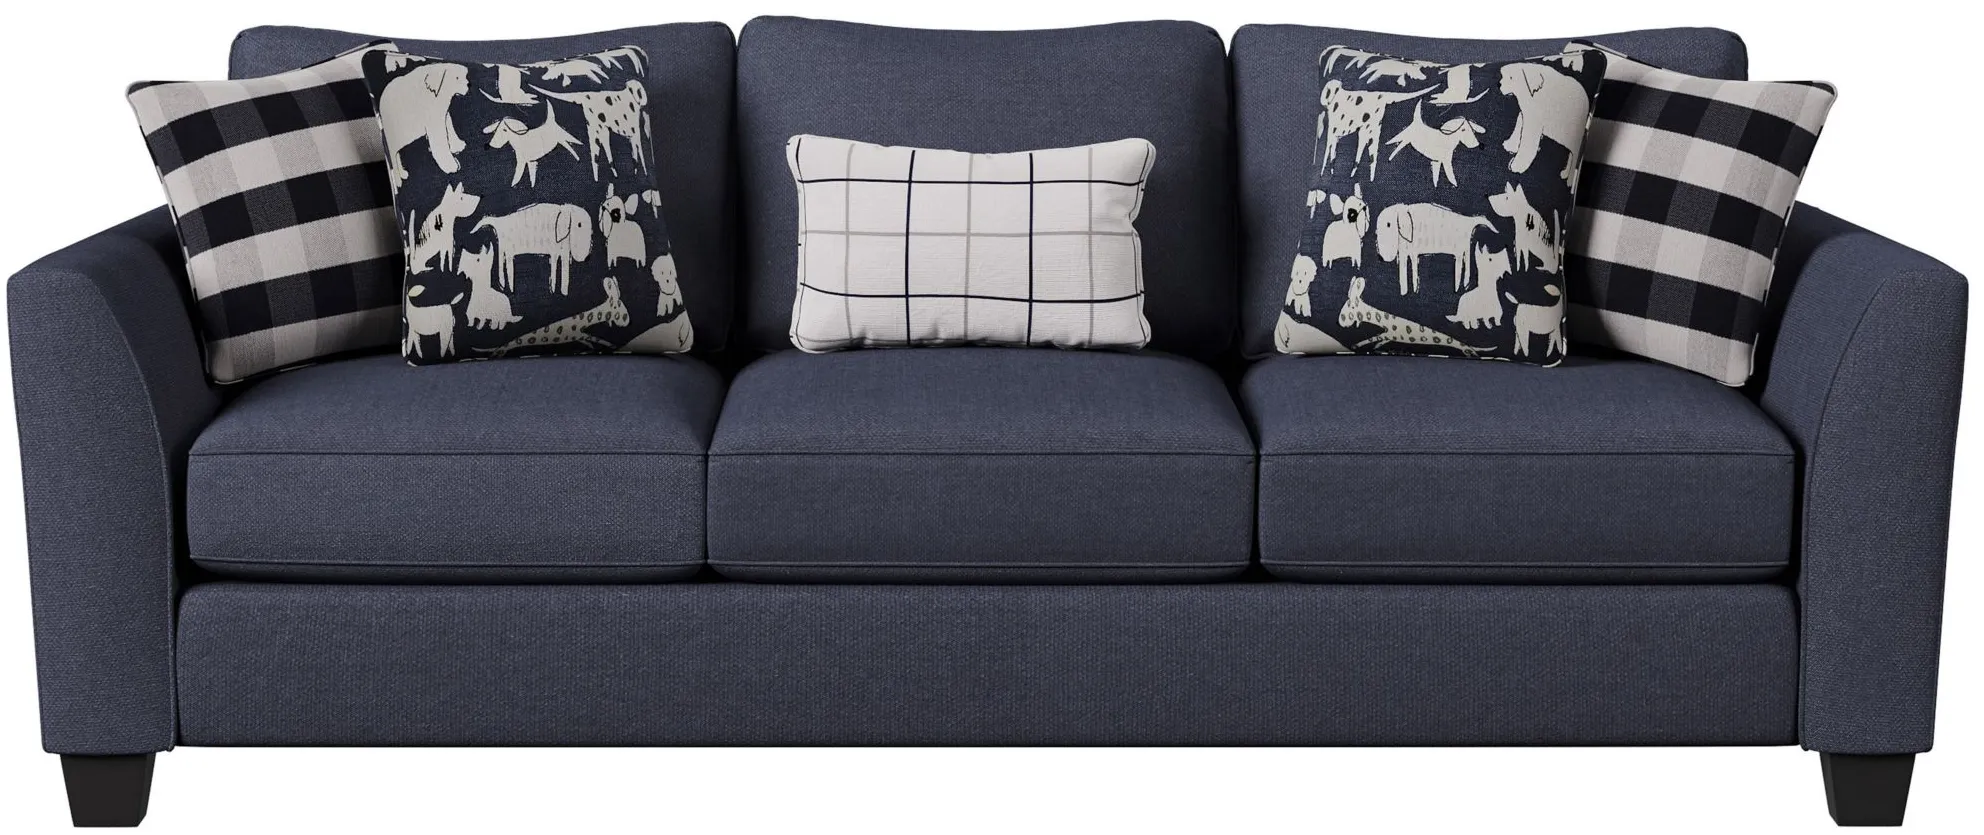 Daine Sofa in Popstich Navy by Fusion Furniture